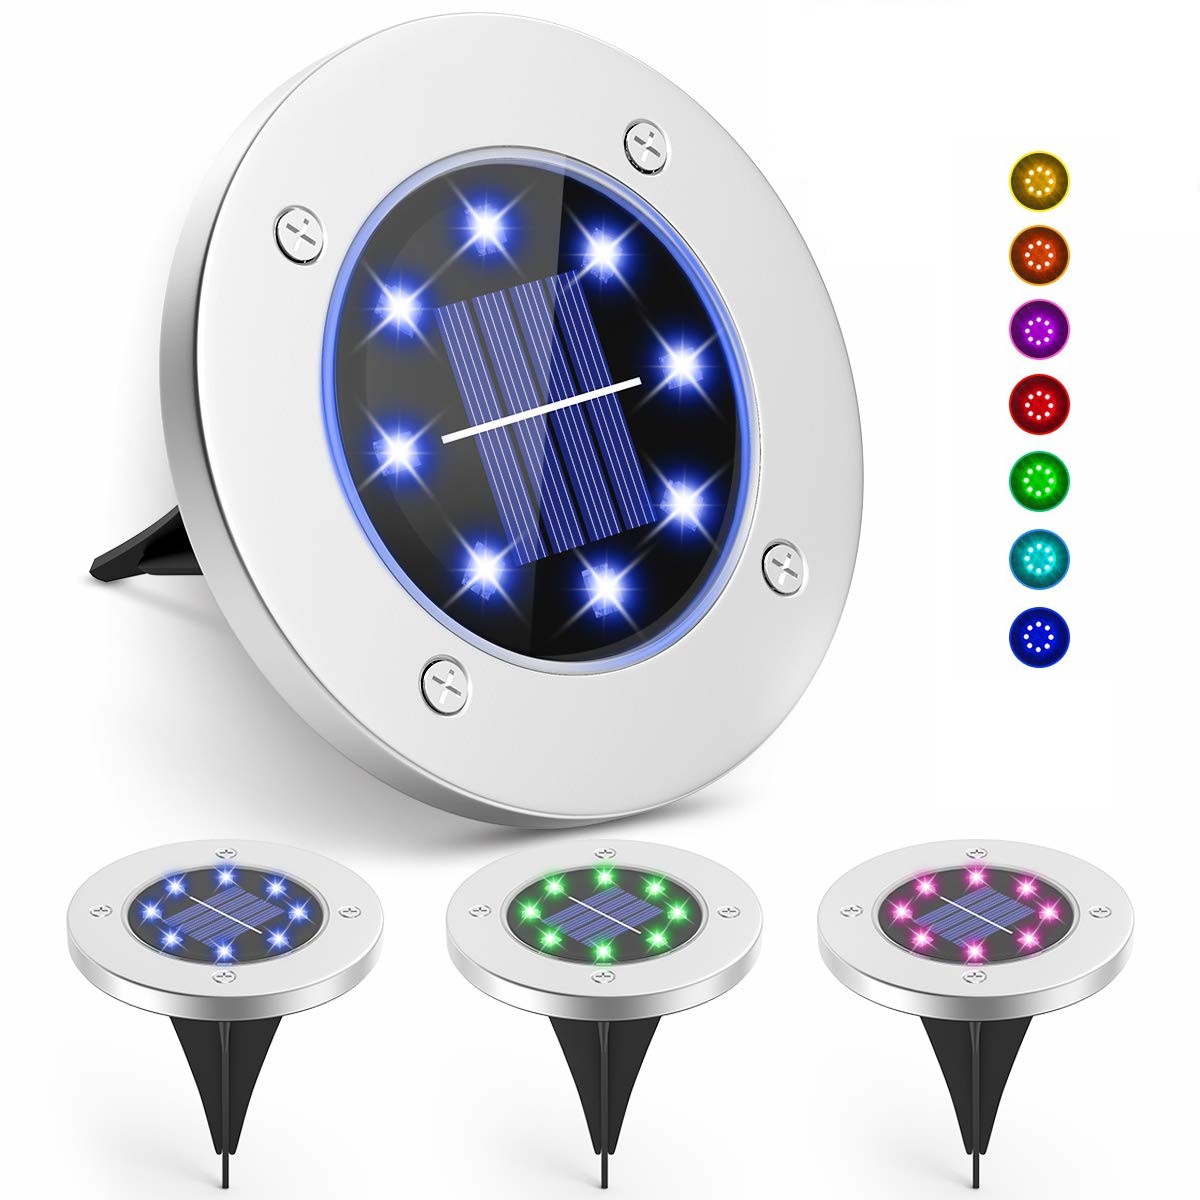 Colorful-Conversion-LED-Lawn-Lights-RGB-Solar-Stainless-Steel-8LED-Underground-Light-Garden-Lawn-Dec-1816608-1